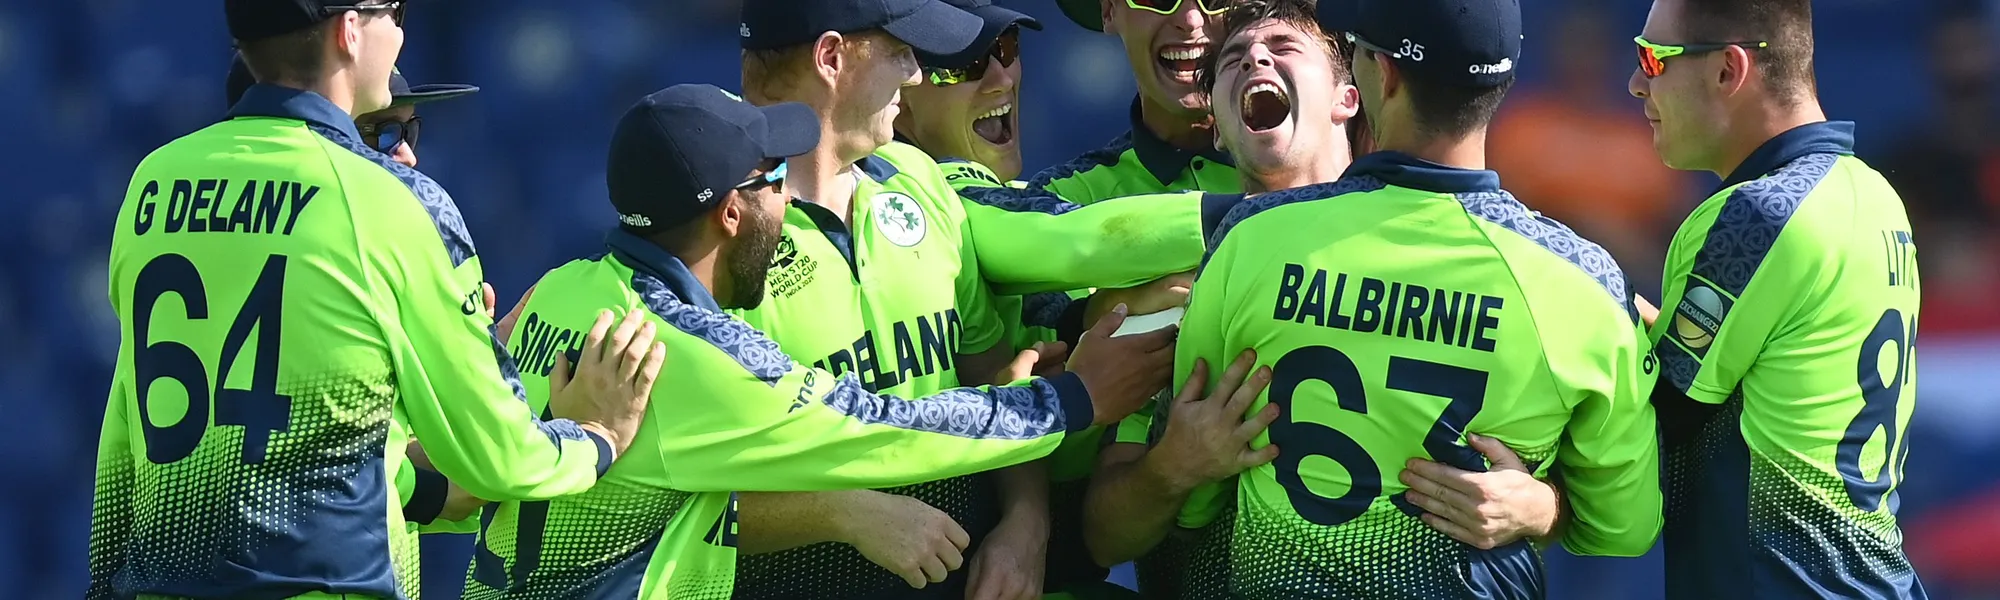 Ireland's Campher takes four wickets in four balls